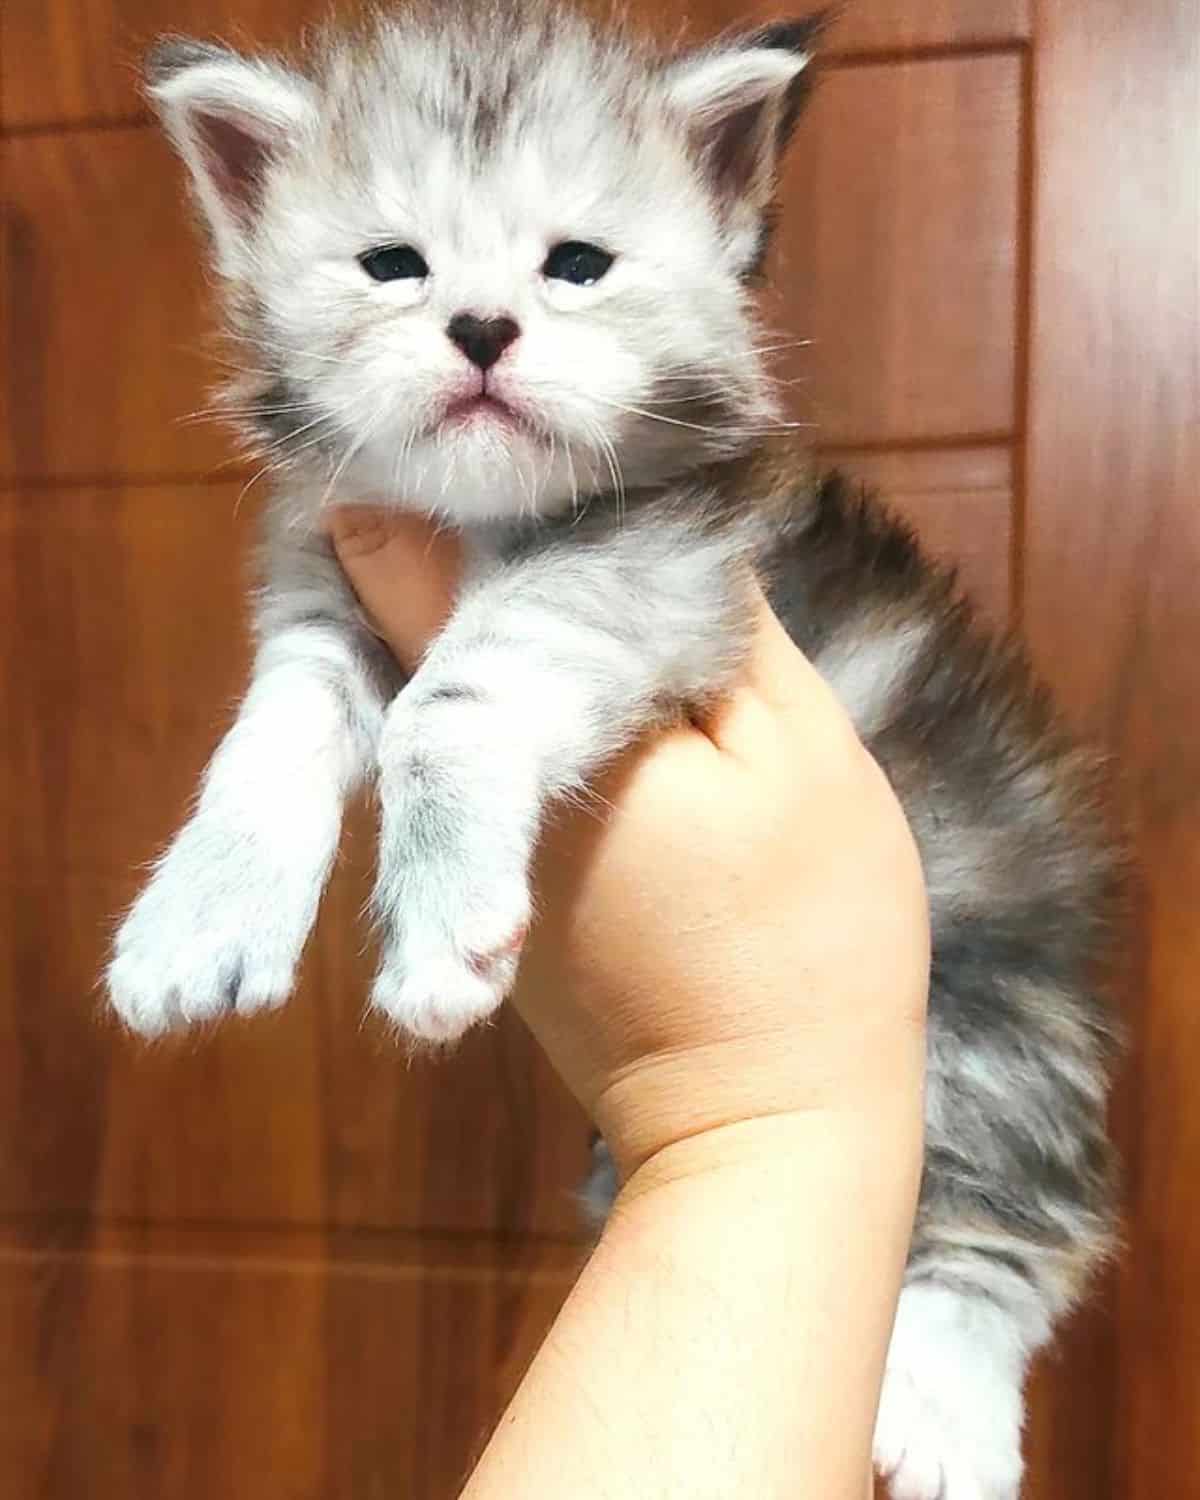 A hand holding a sleepy maine coon kitten in the air.